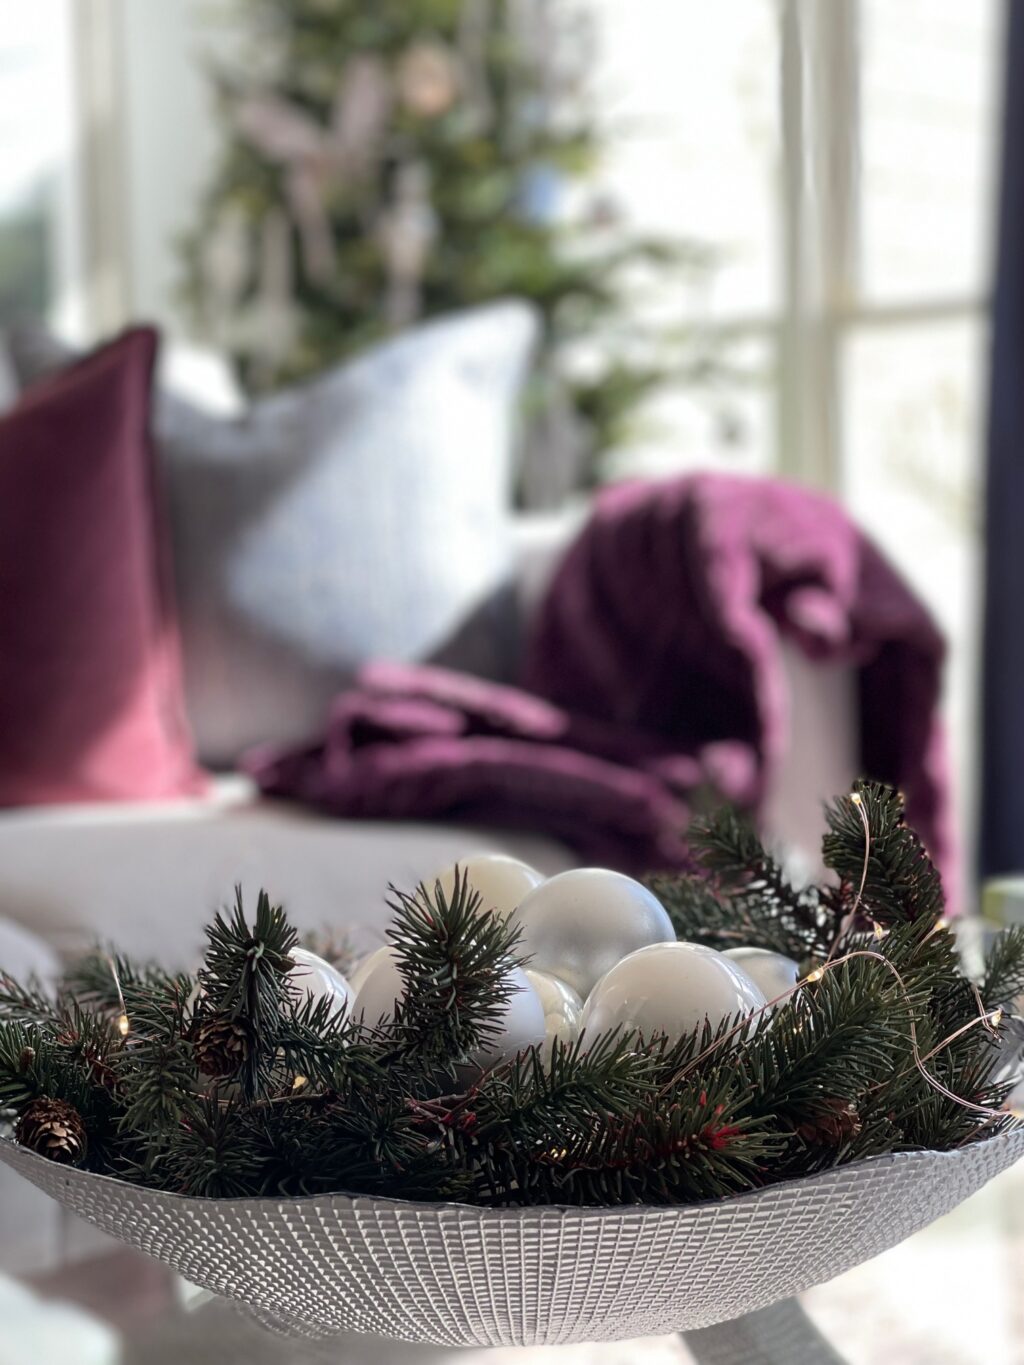 bowl filled with ever green and ornaments with decorated tree in background.